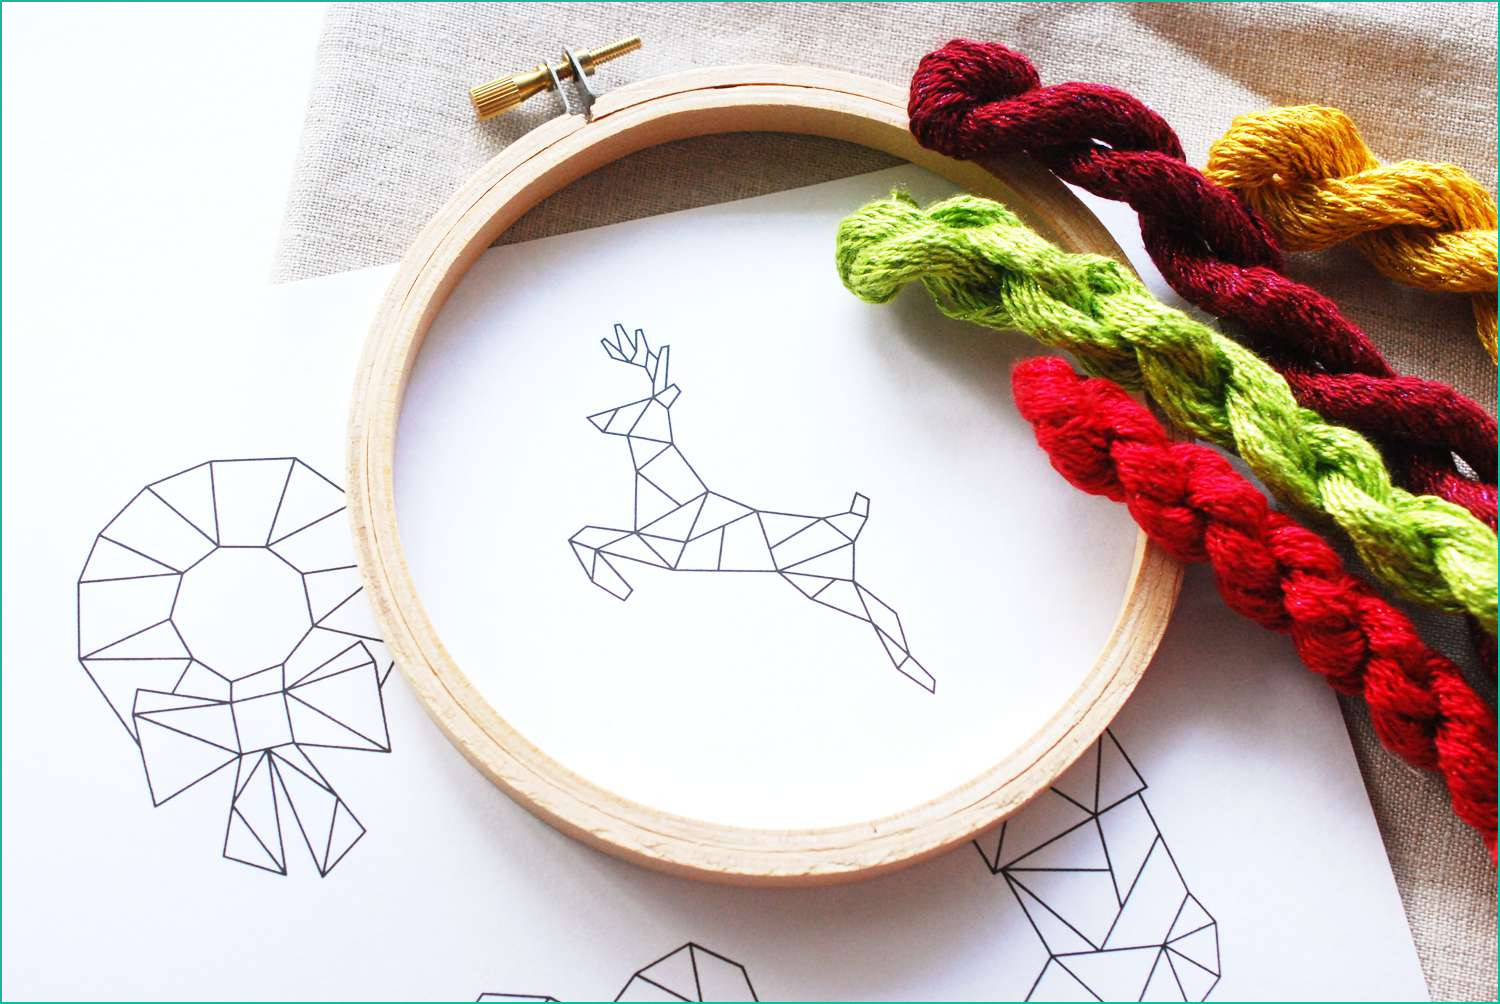 Free Hand Embroidery Patterns To Print Free Small Christmas Cross Stitch Patterns To Print Lovely 97 T 10